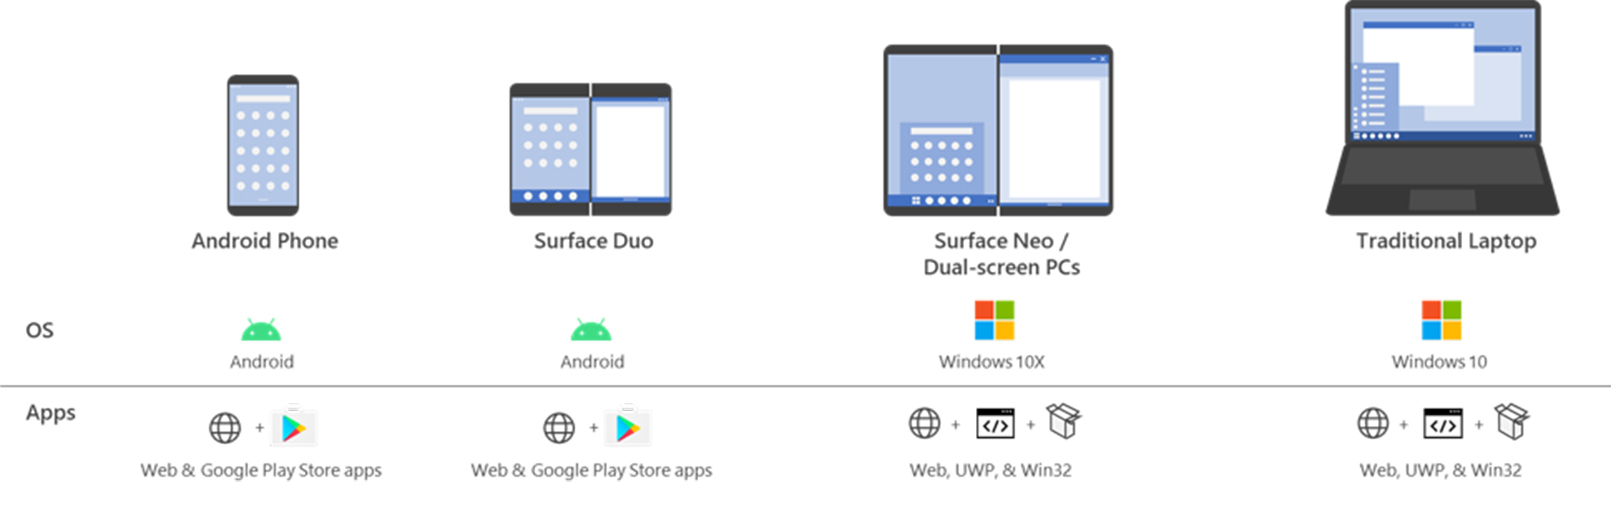 Microsoft Surface app compatibility